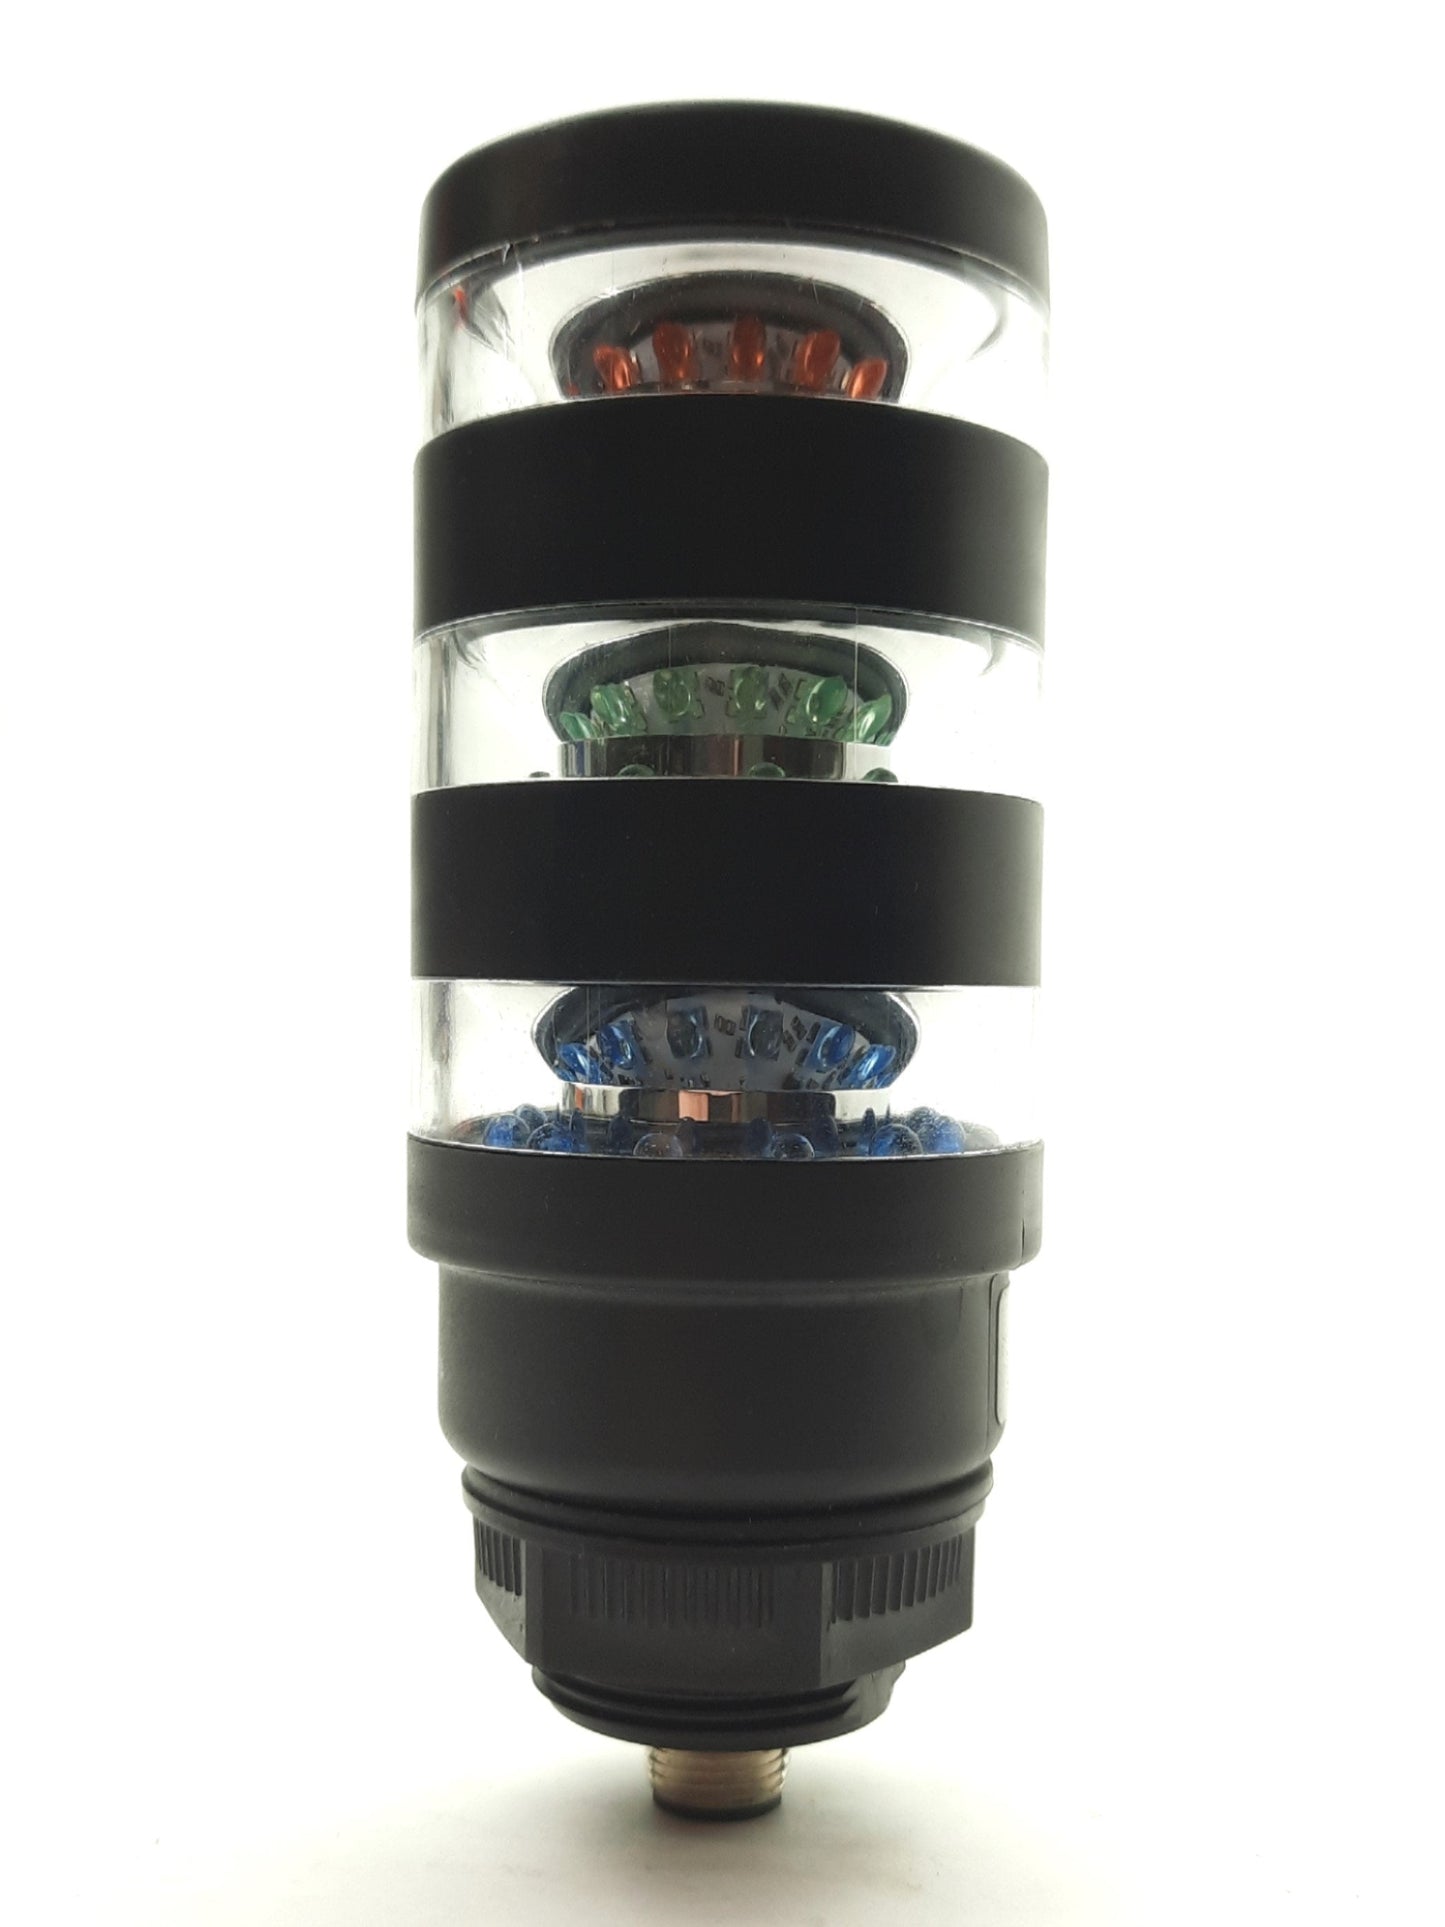 Used Banner TL50BLBGRQ LED Tower Light, Blue, Green, Red, M12 4-Pin Male, 24VAC/DC